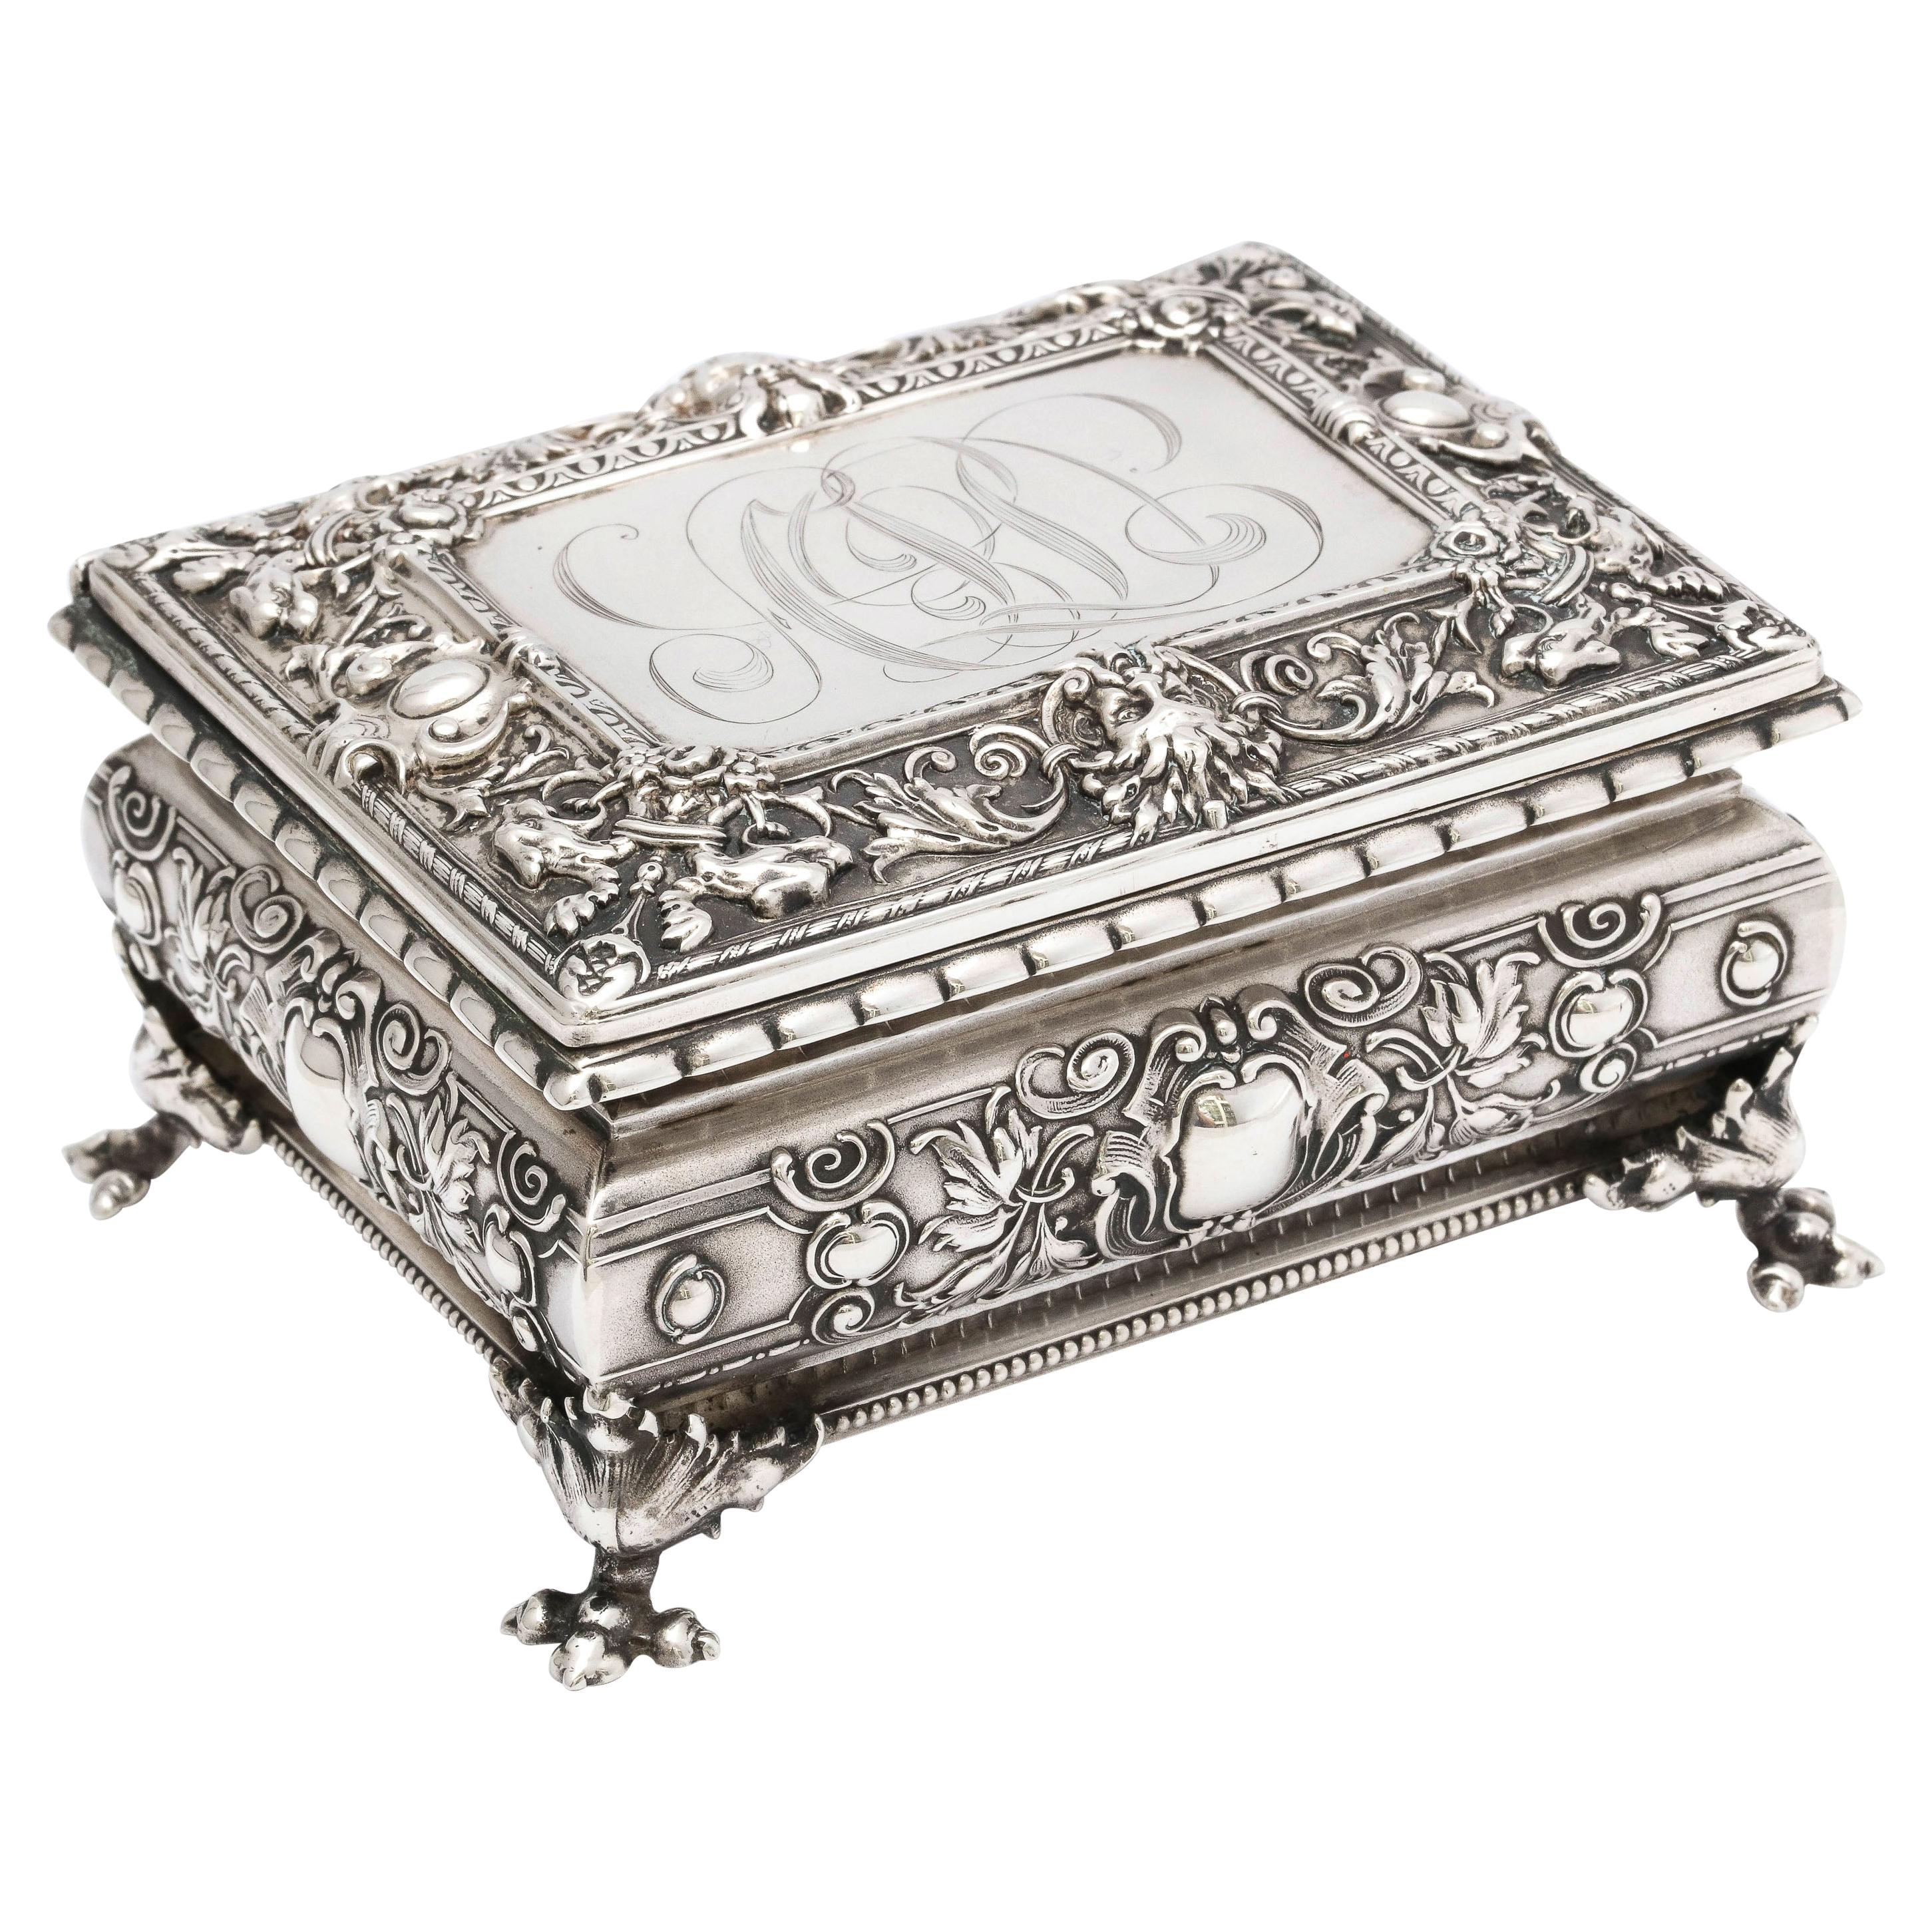 Victorian Period Sterling Silver Jewelry/Trinkets Box with Hinged Lid by Kerr